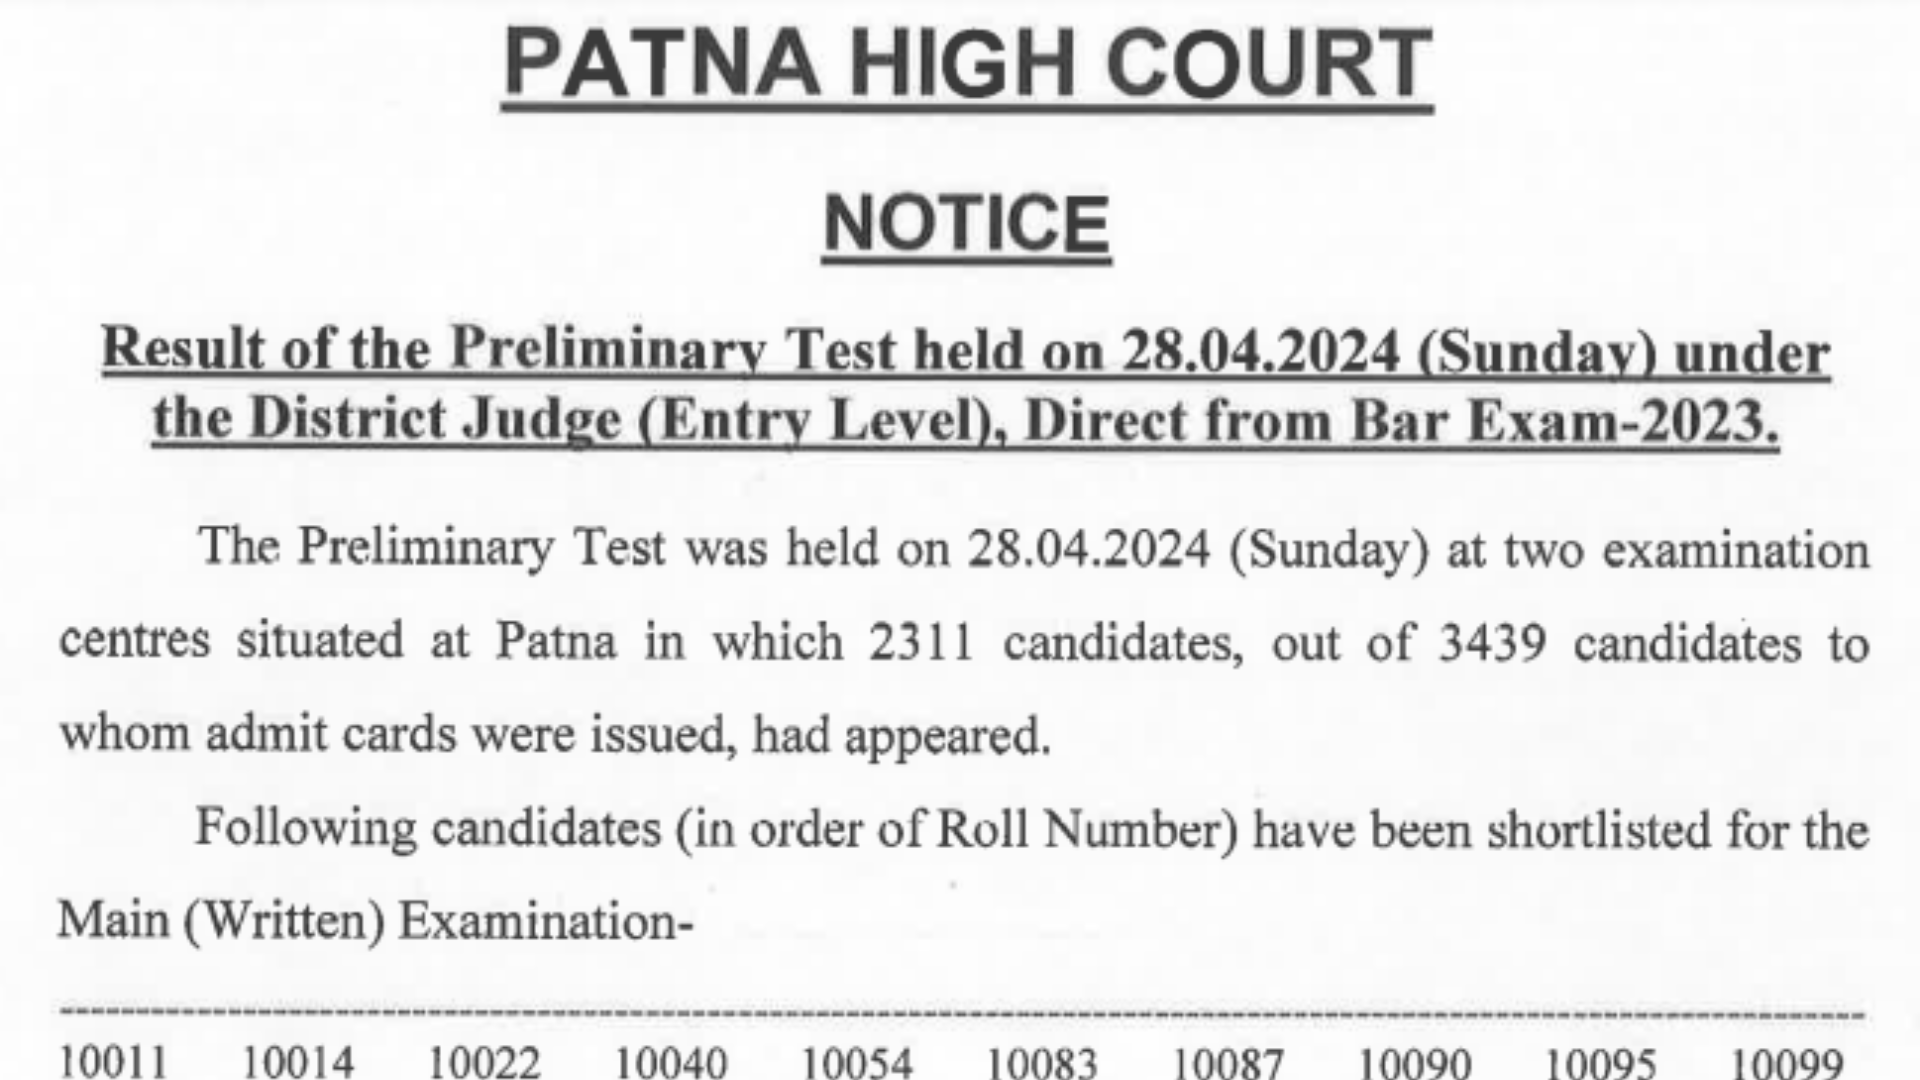 Patna High Court District Judge Recruitment 2023 Pre Result 2024 for 30 Post